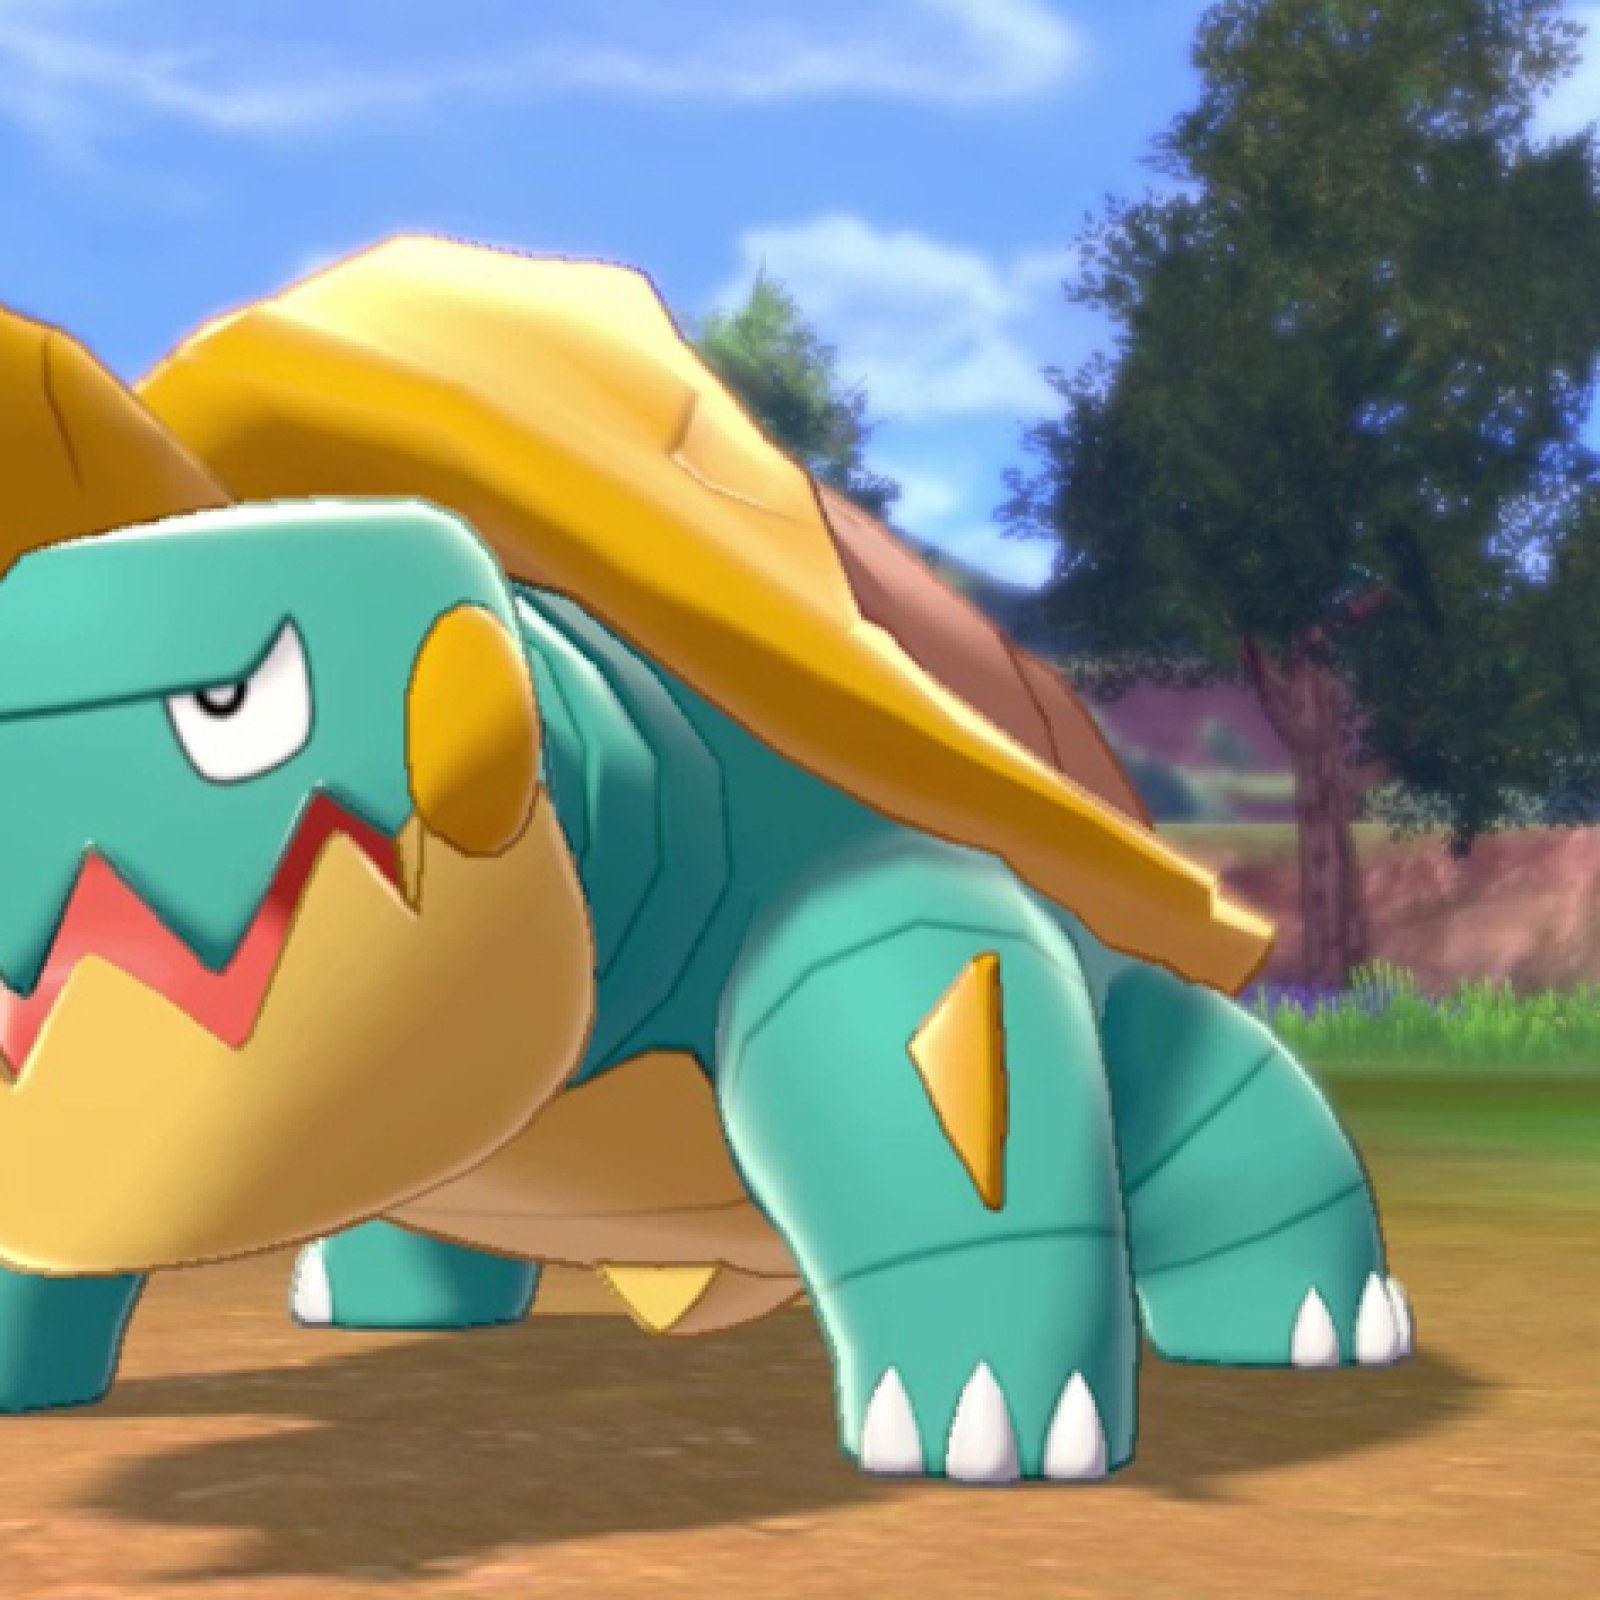 Game Freak Confirms Models In Pokémon Sword And Shield